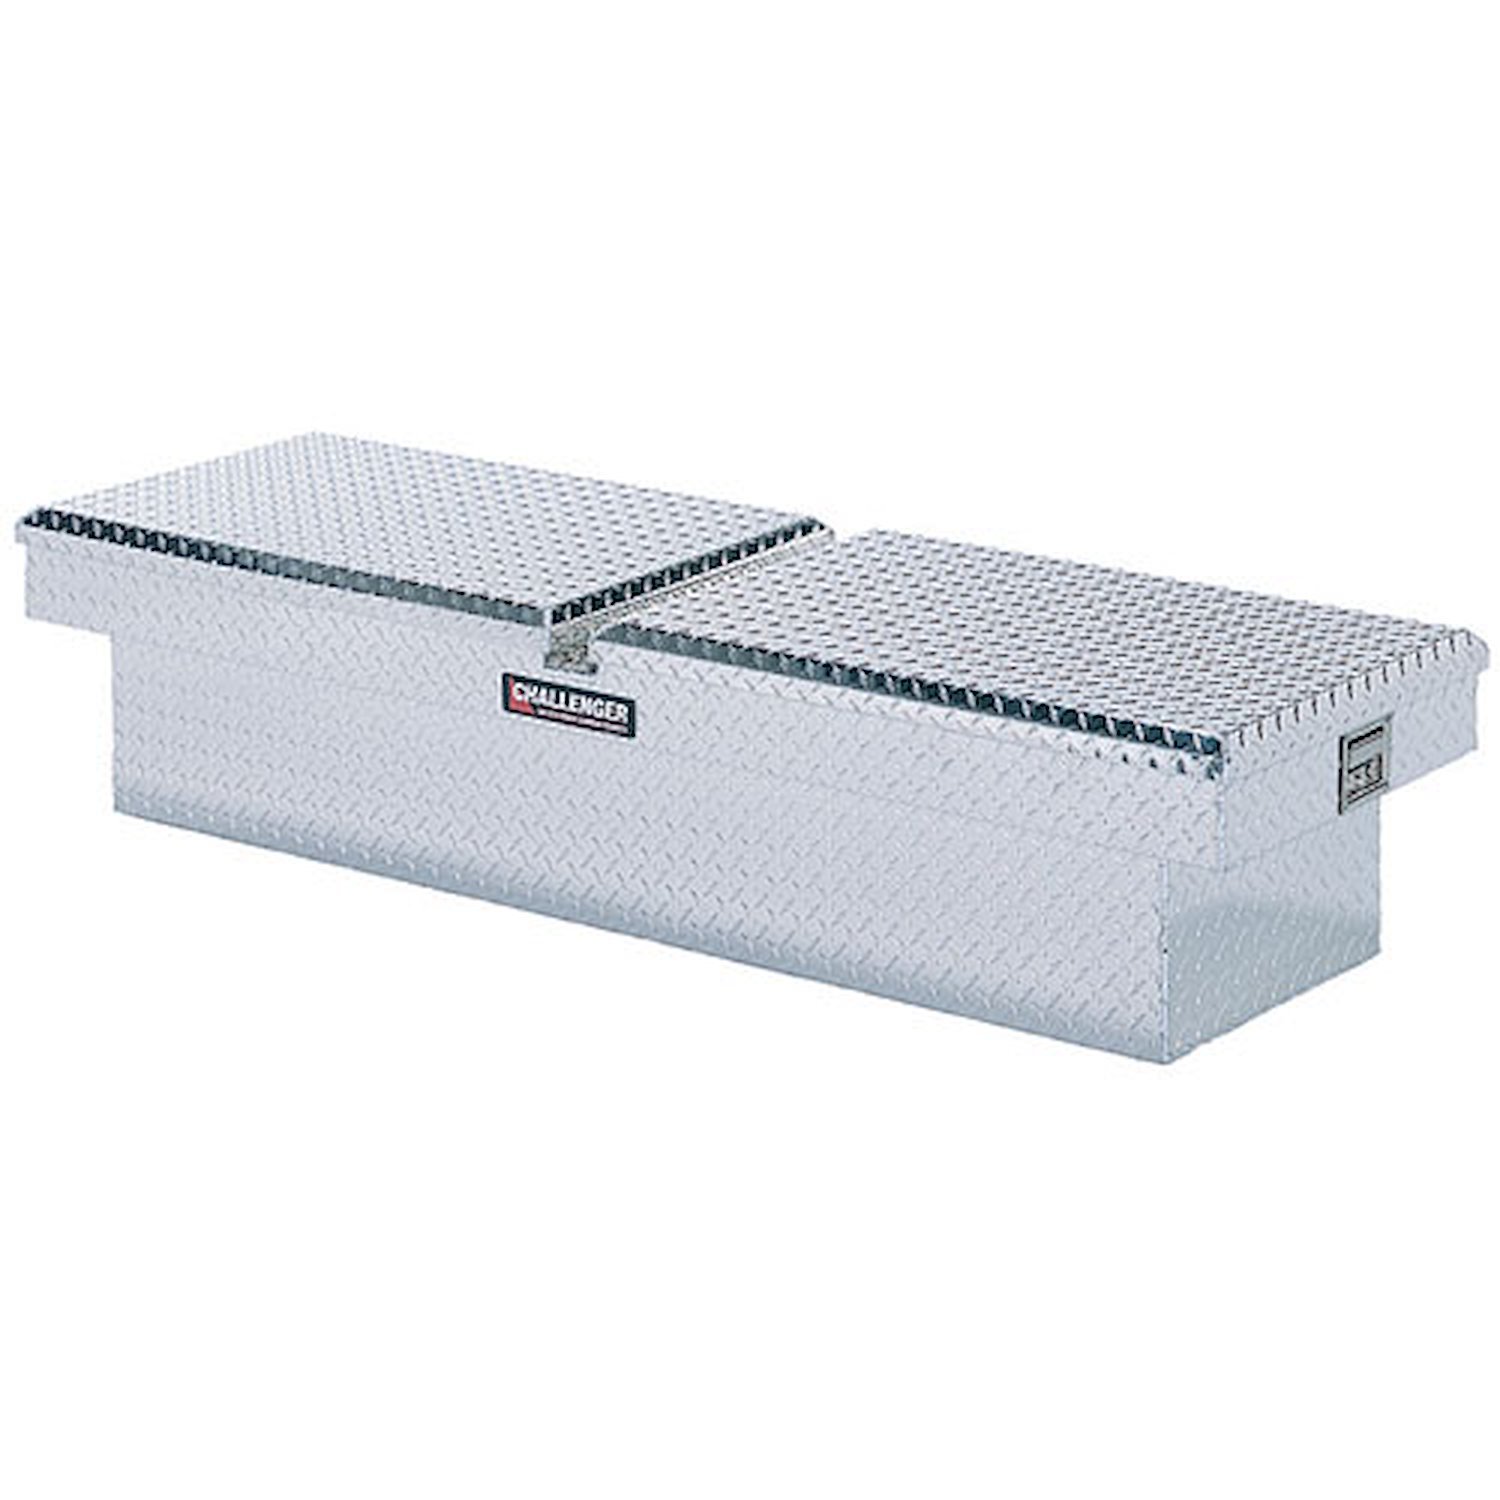 Truck Bed Challenger Tool Box Length: 70.25